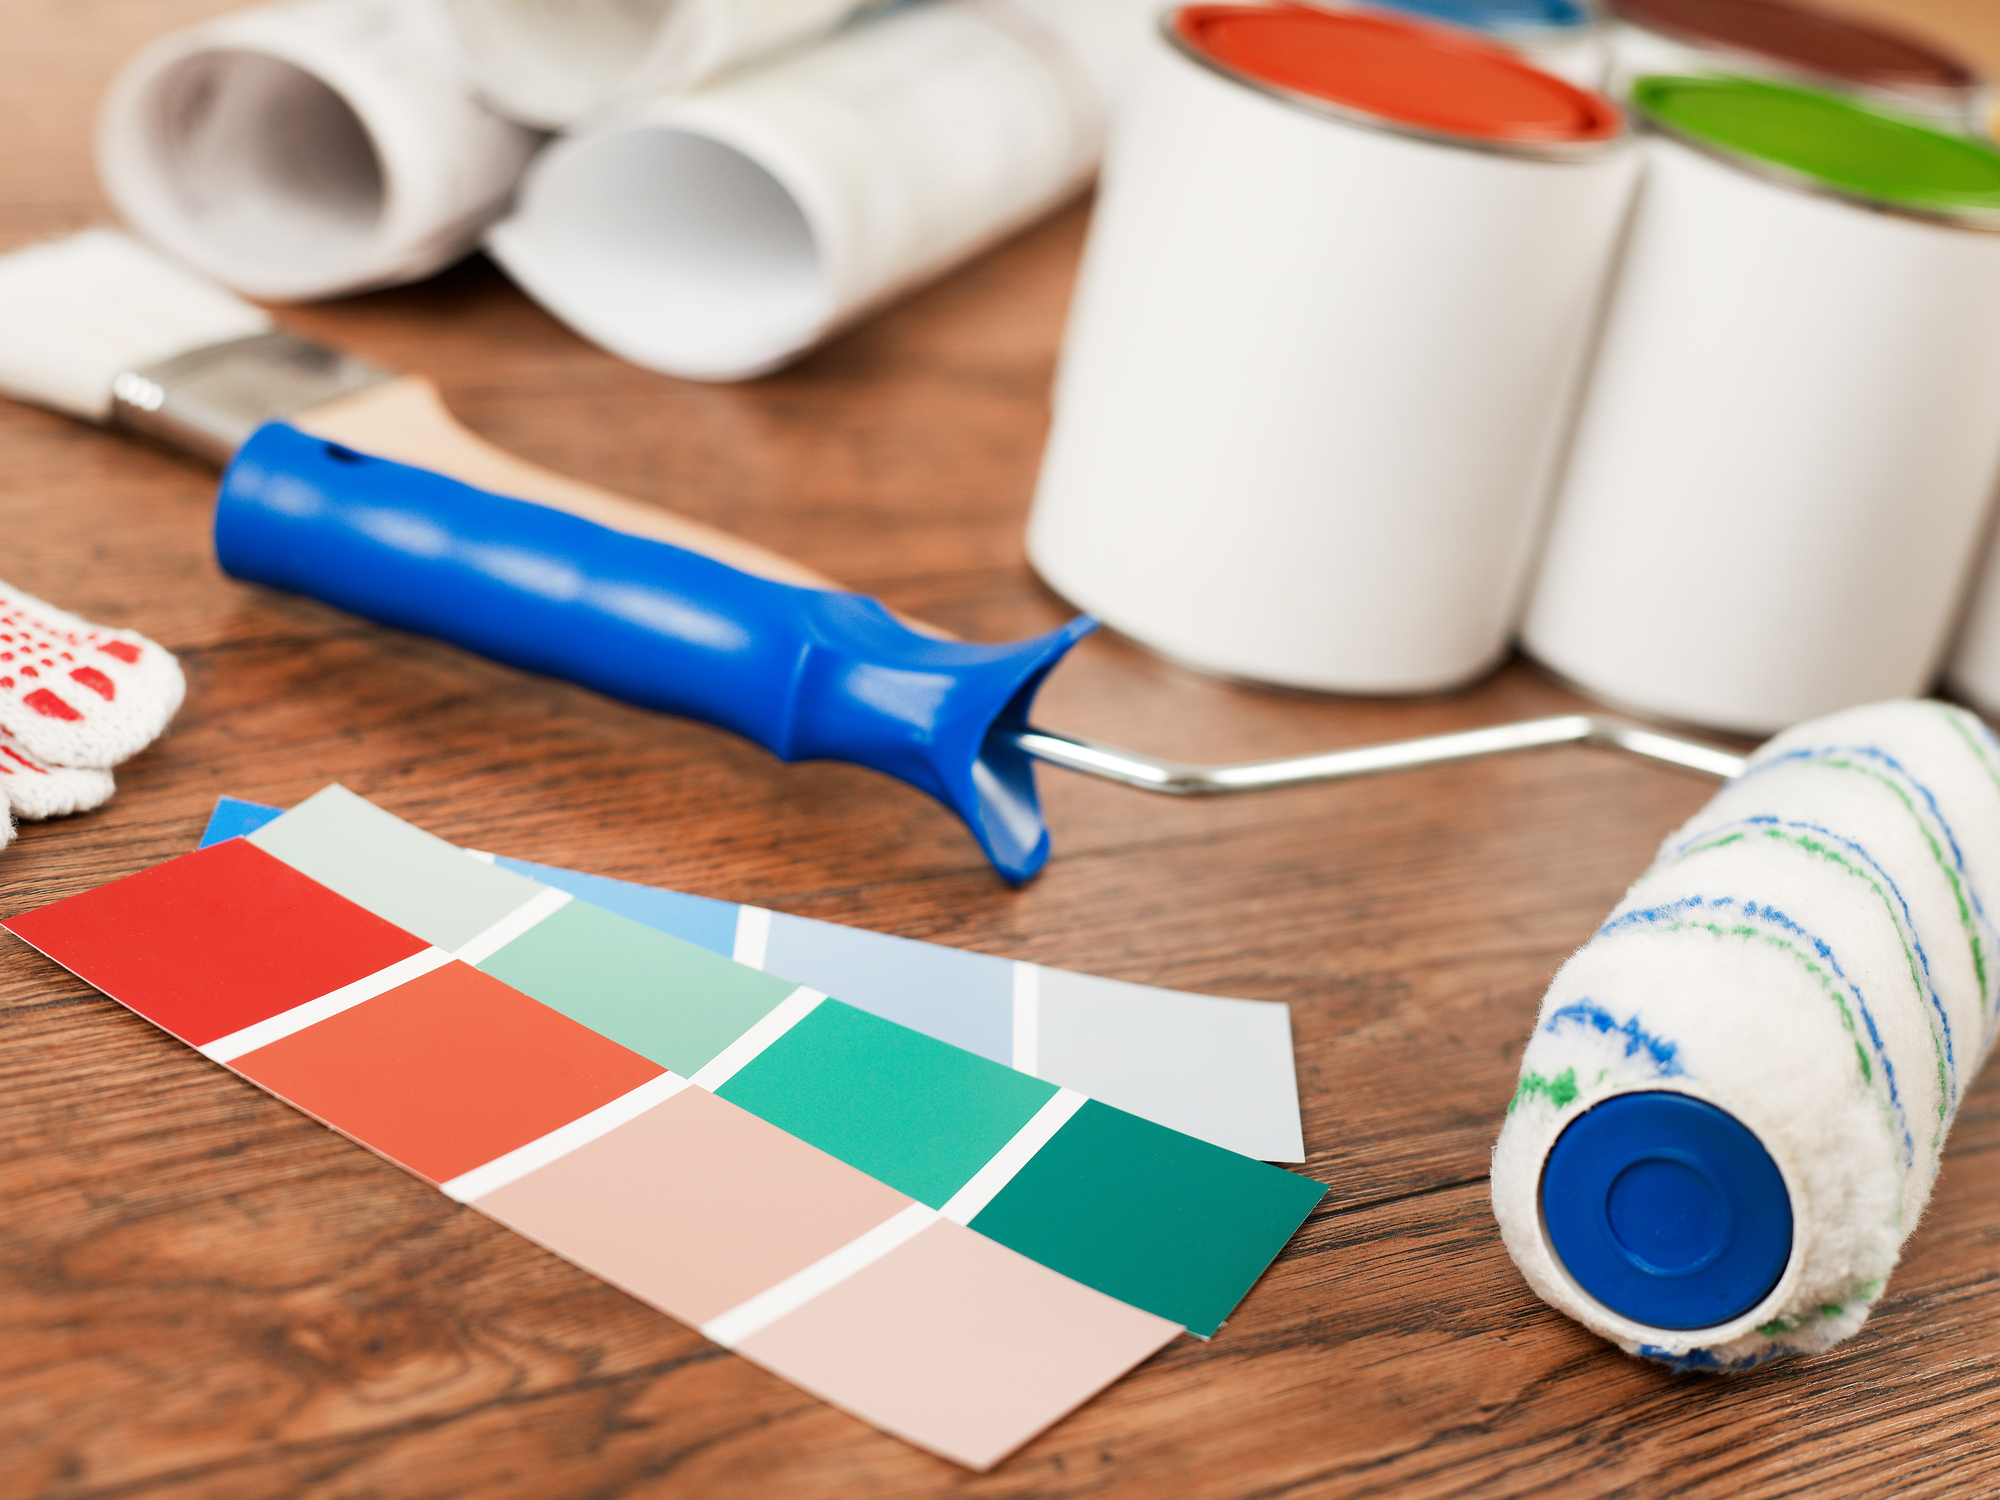 Paint color cards, paint roller and cans